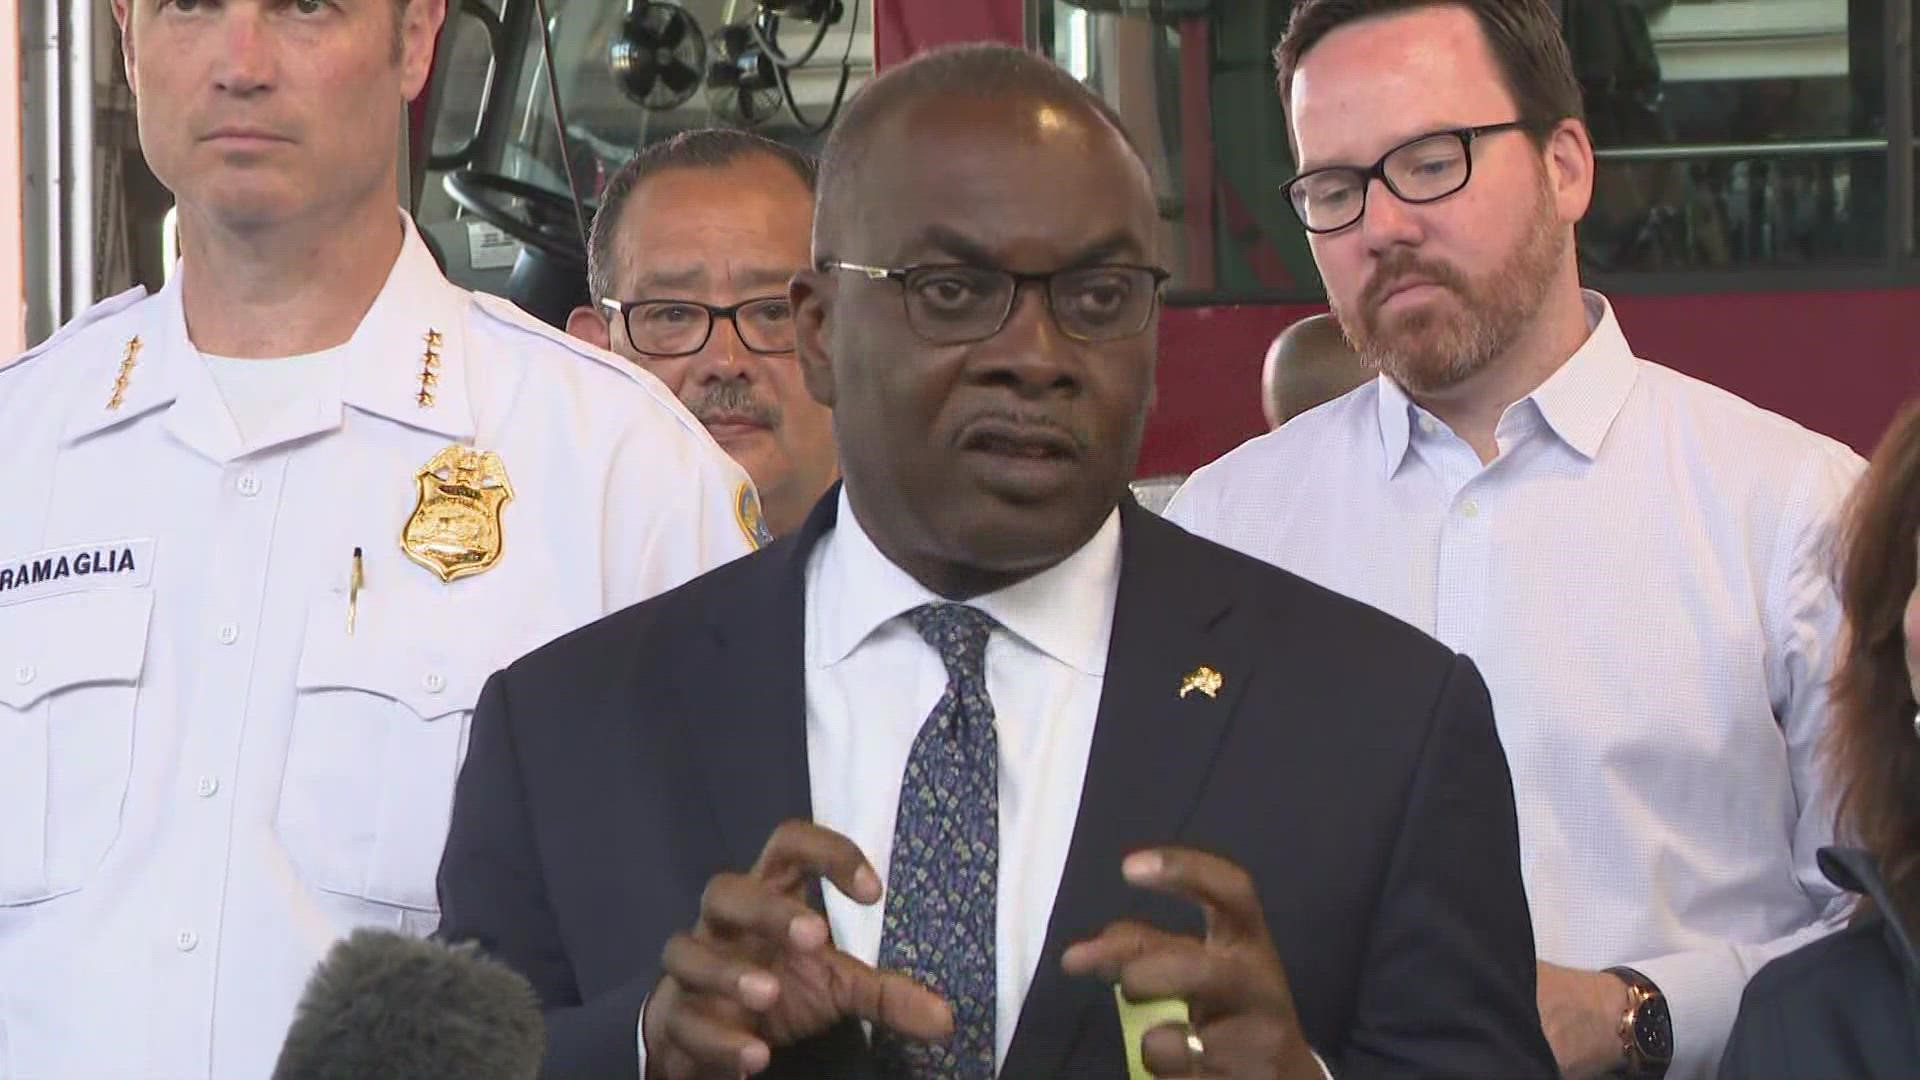 Buffalo Mayor Byron Brown discusses resources available for community